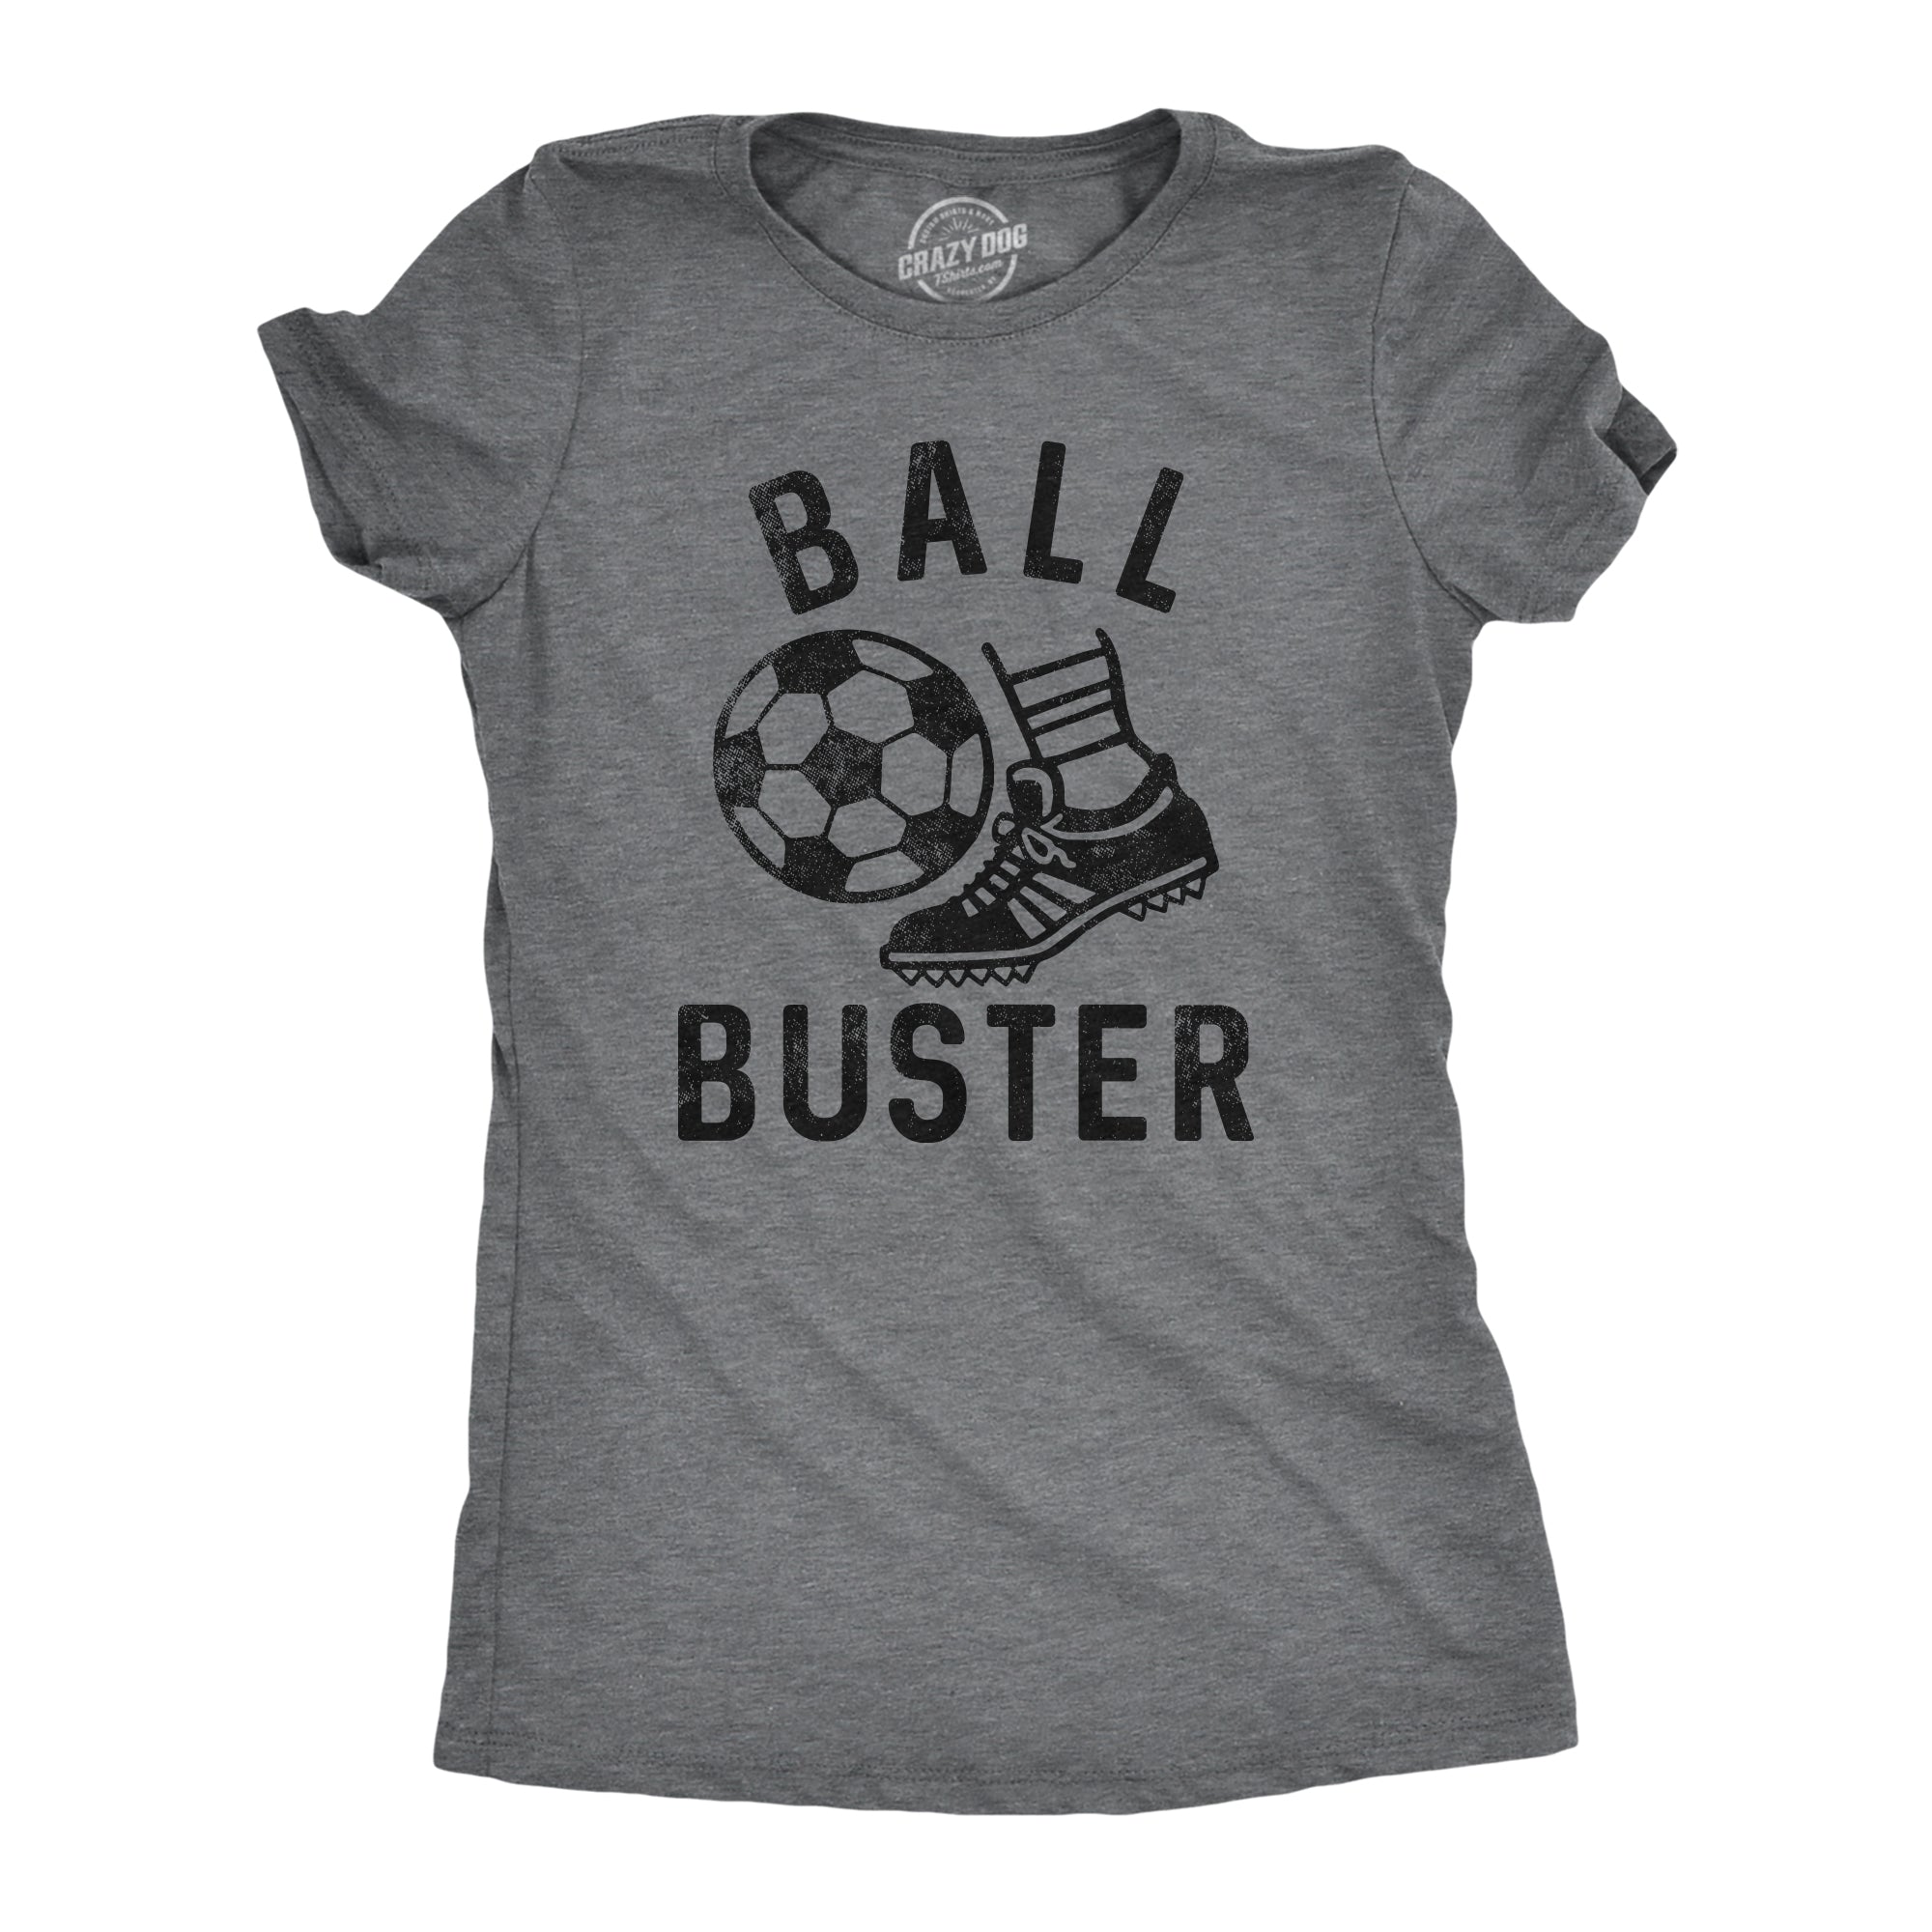 Funny Dark Heather Grey - BUSTER Ball Buster Soccer Womens T Shirt Nerdy Soccer sarcastic Tee